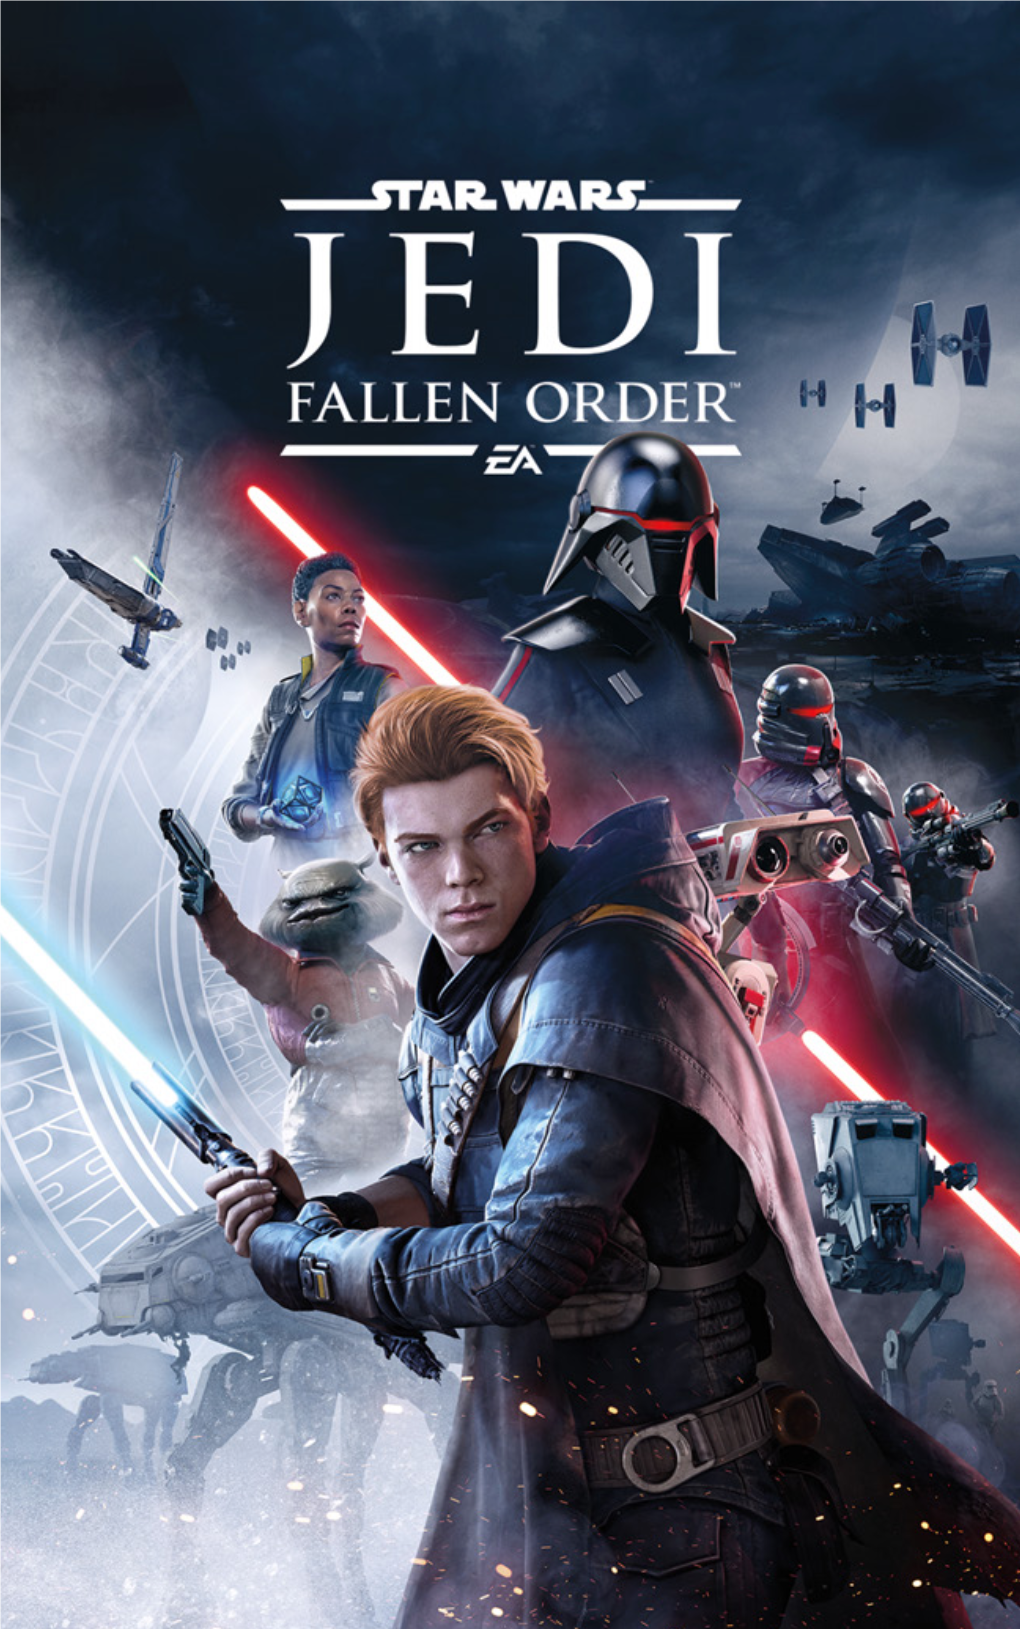 Star Wars Jedi: Fallen Order on PC Allows You to Play the Game on a Variety of Control Devices